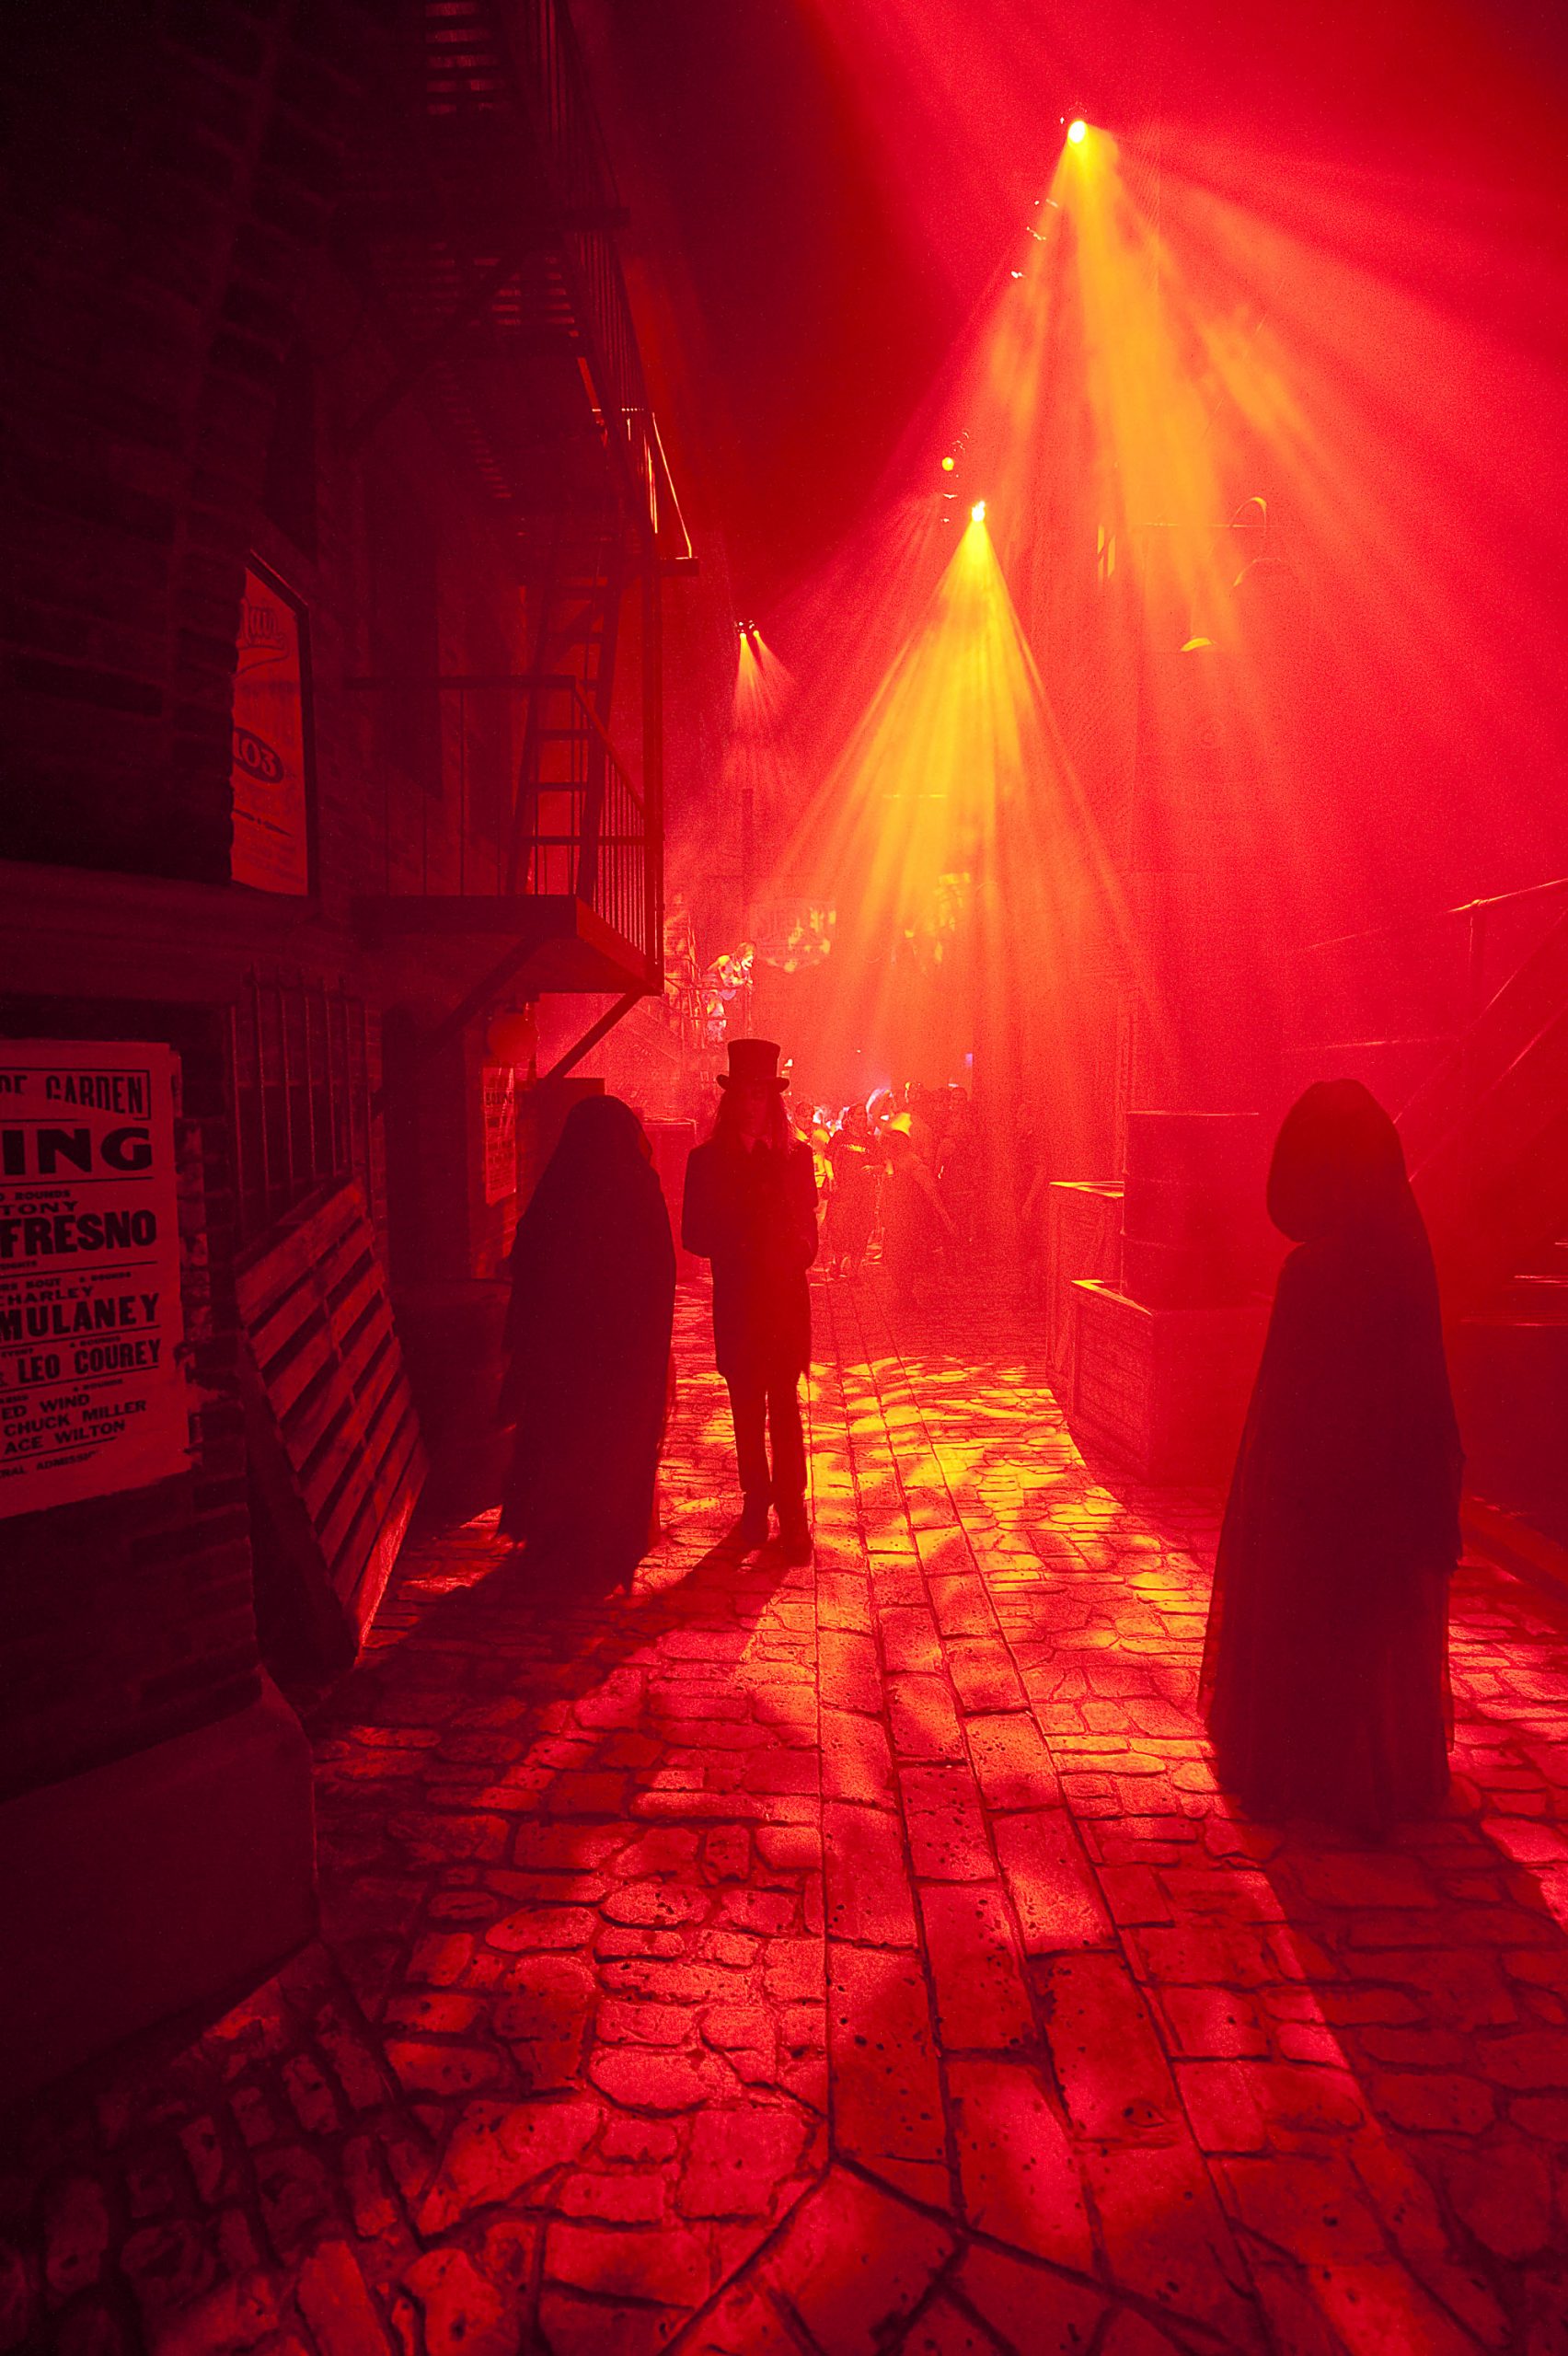 Halloween Horror Nights Tickets 2014 Are On Sale Now!